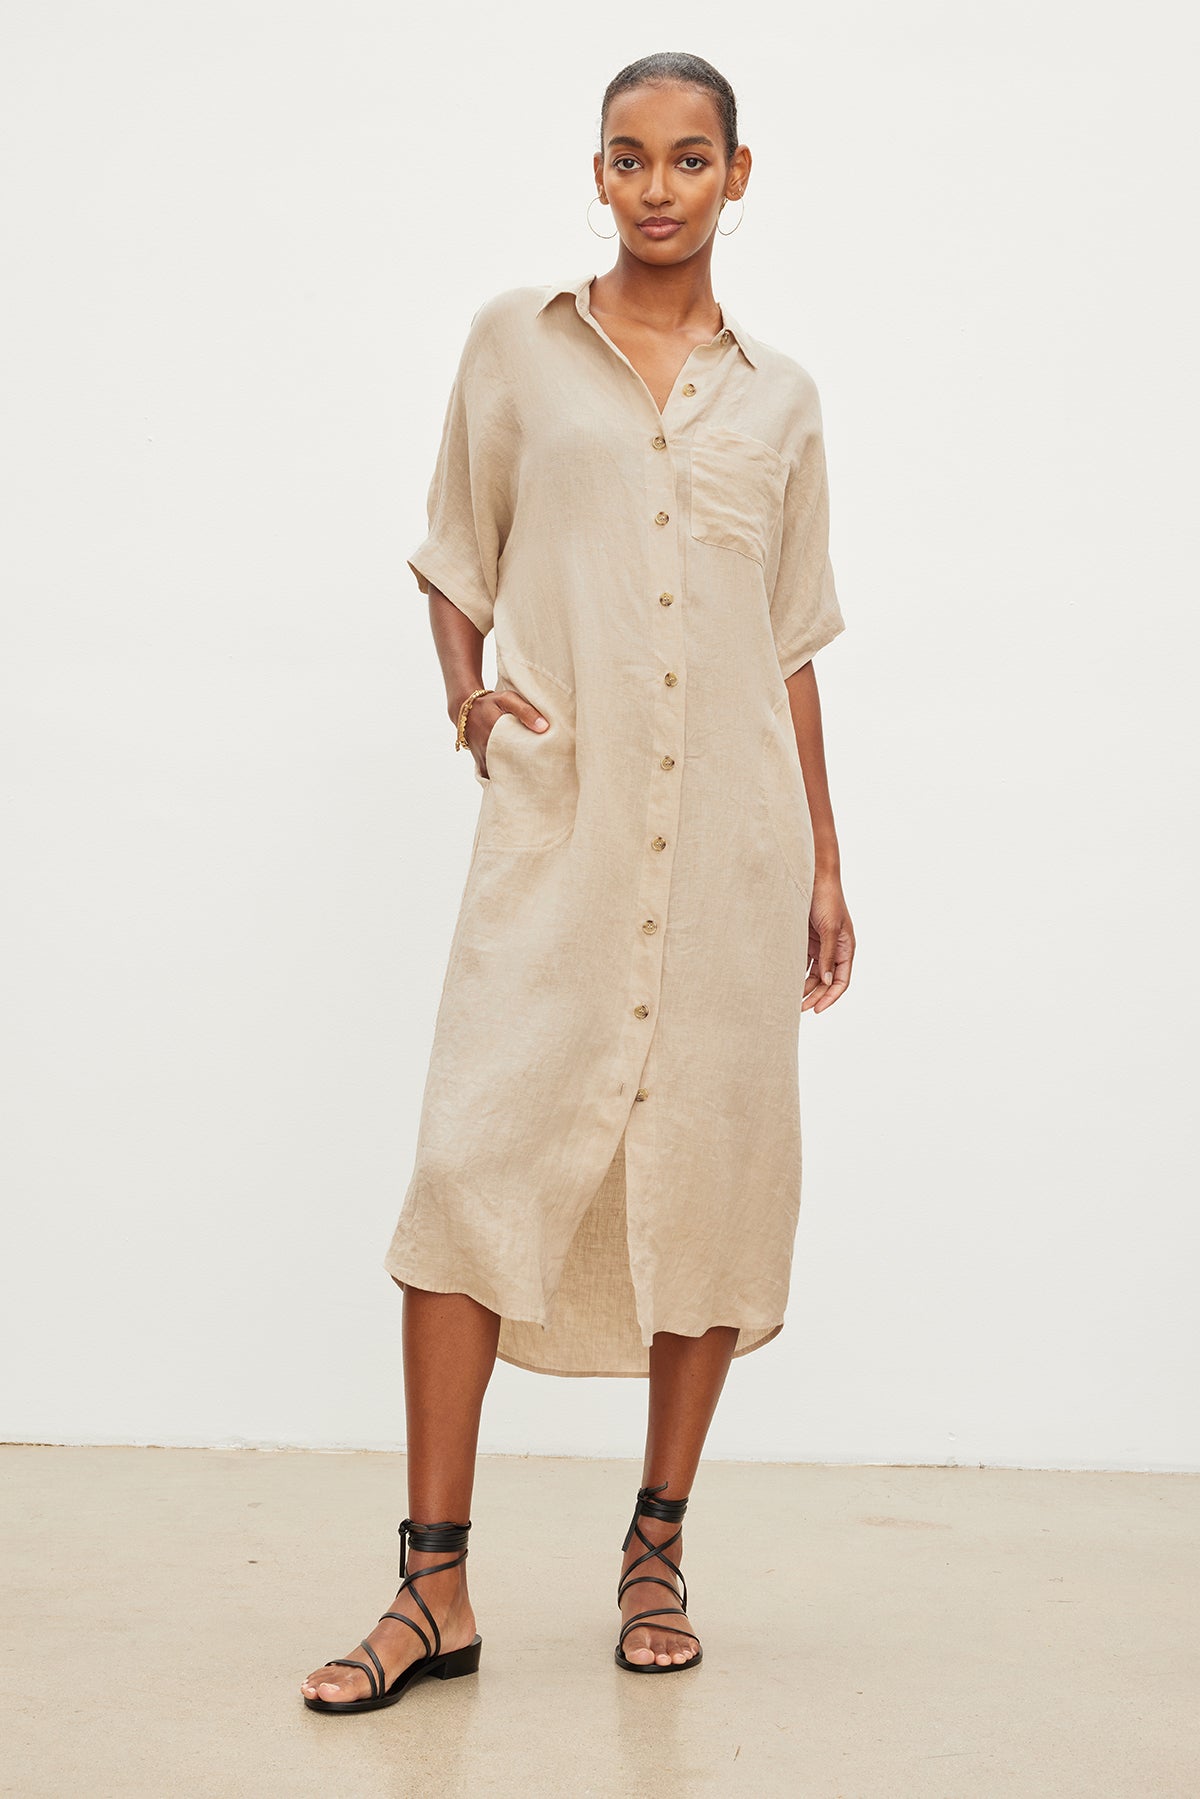 A woman in a SANDRA LINEN BUTTON-UP DRESS by Velvet by Graham & Spencer with short sleeves and buttons standing in a neutral studio setting, paired with black strappy sandals.-35967717474497